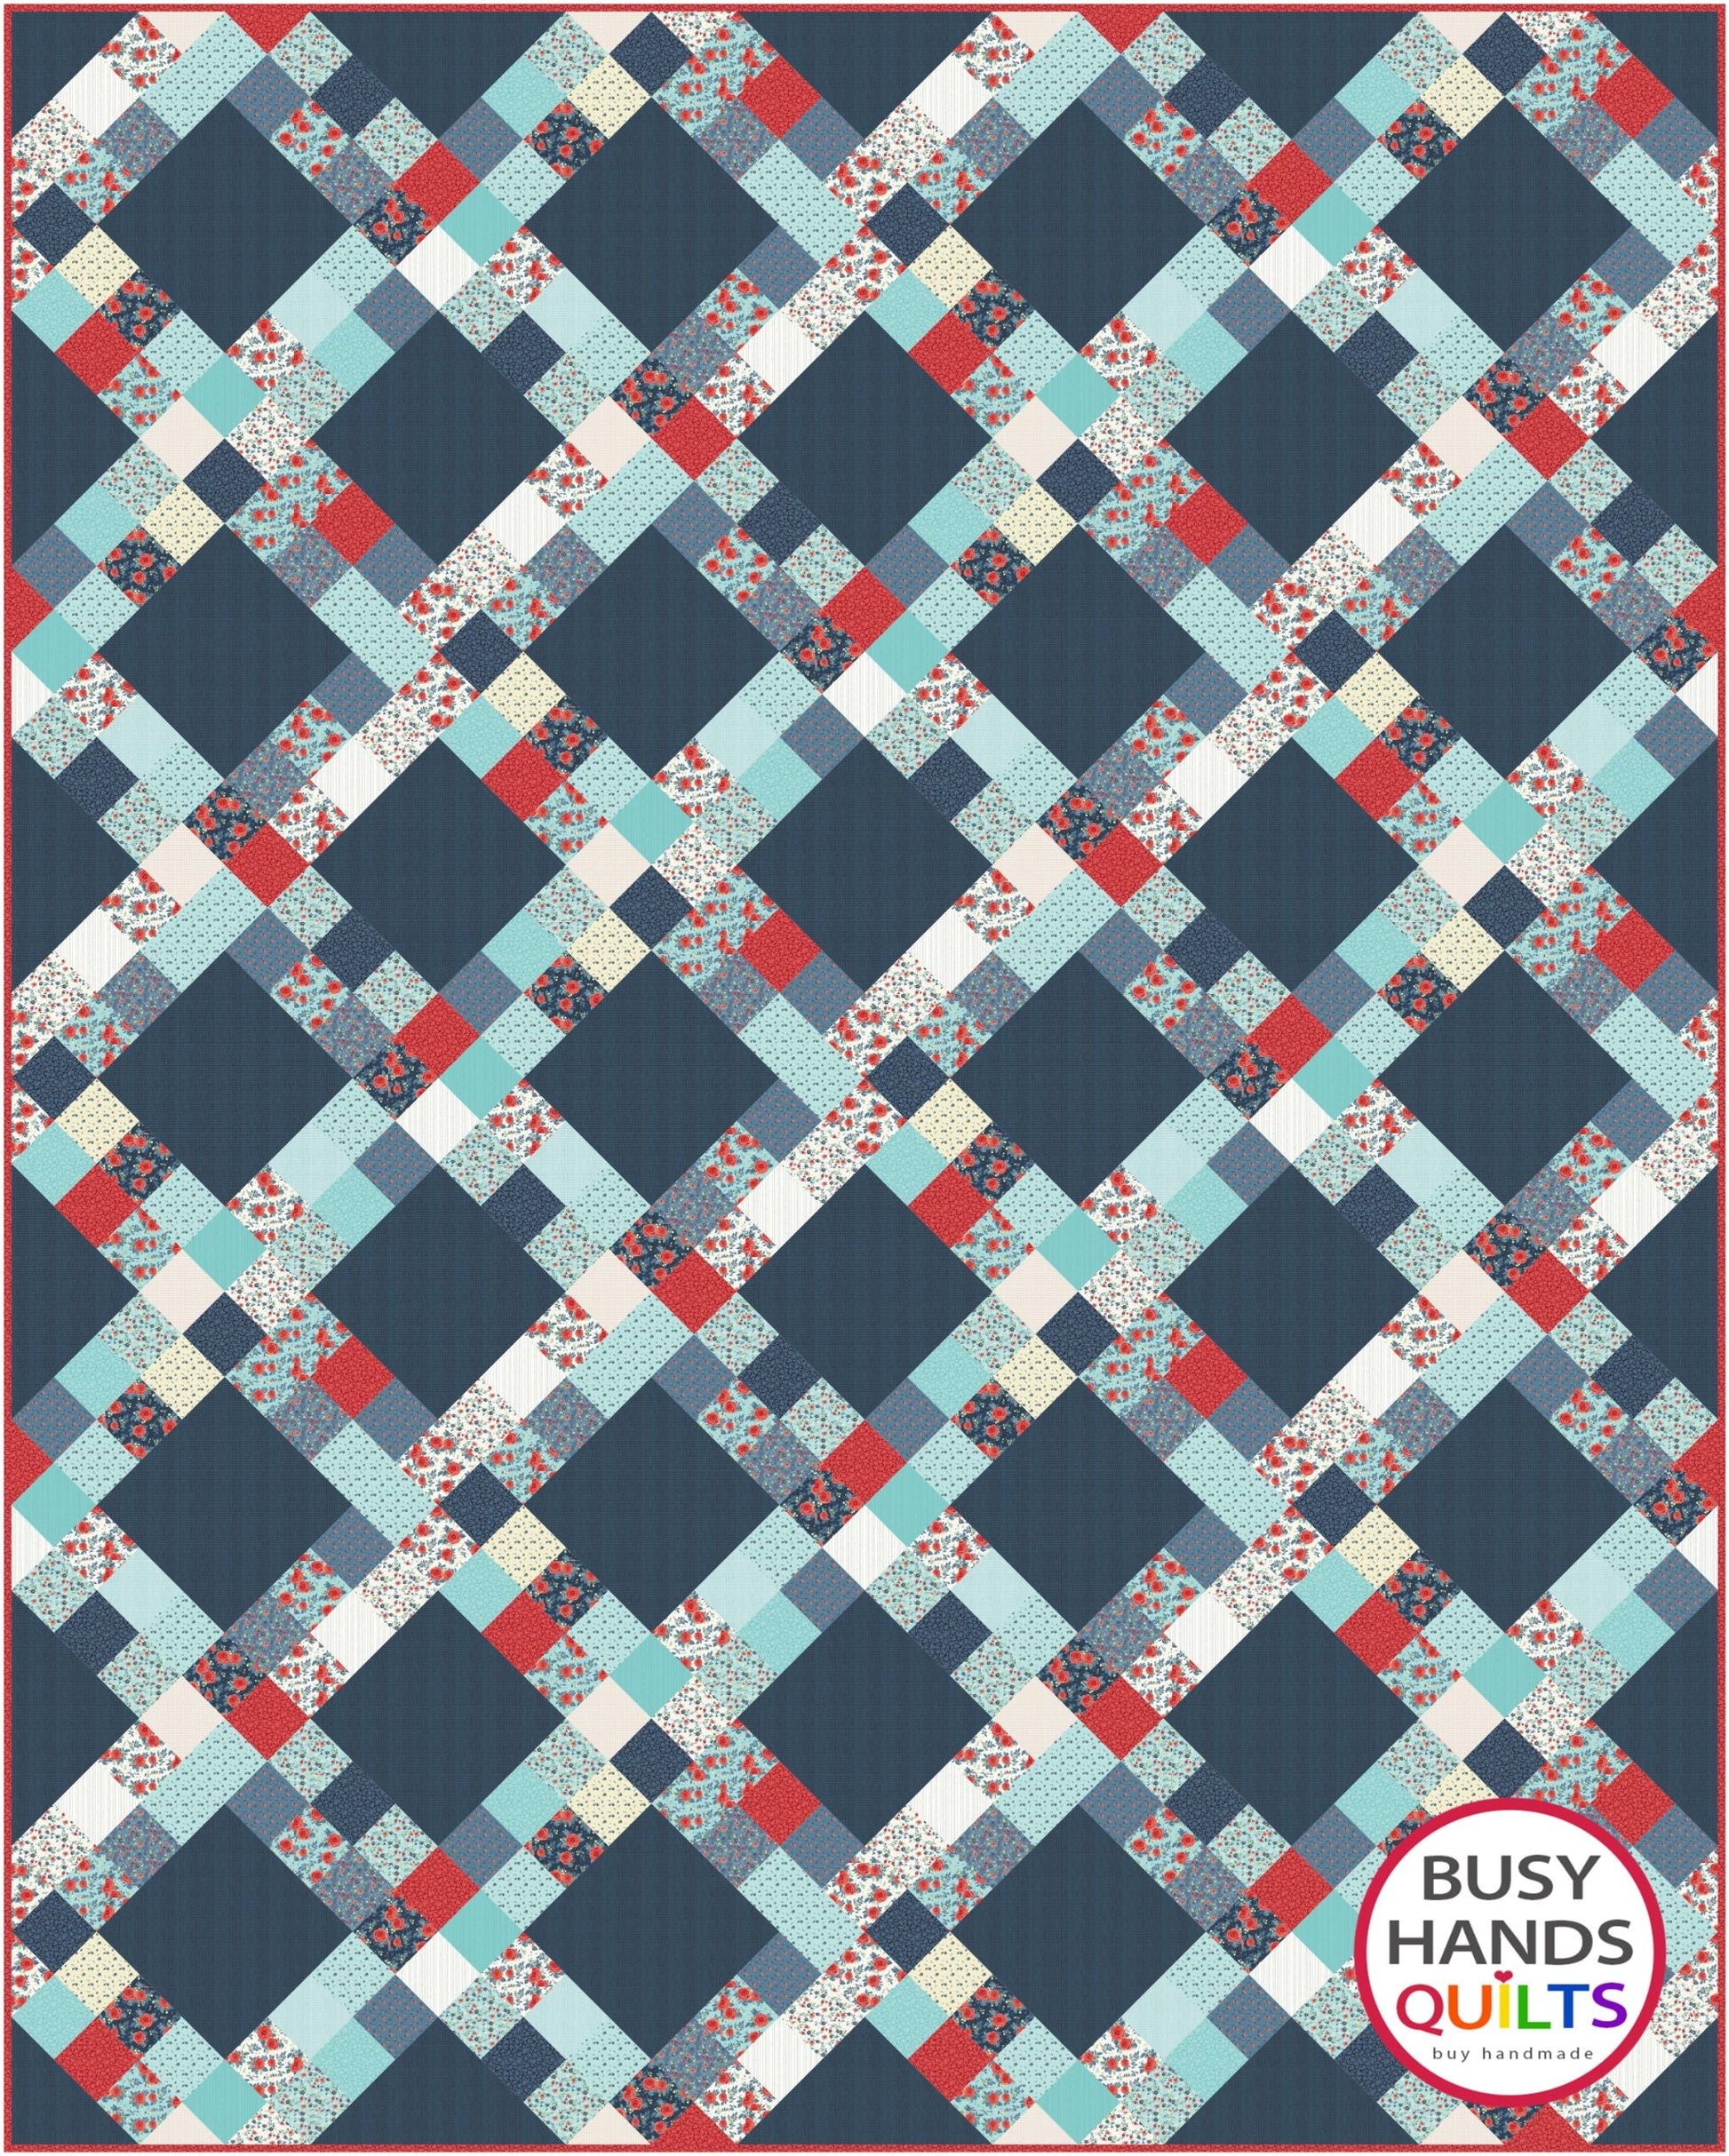 Hand Picked Quilt Pattern PDF DOWNLOAD Busy Hands Quilts $12.99